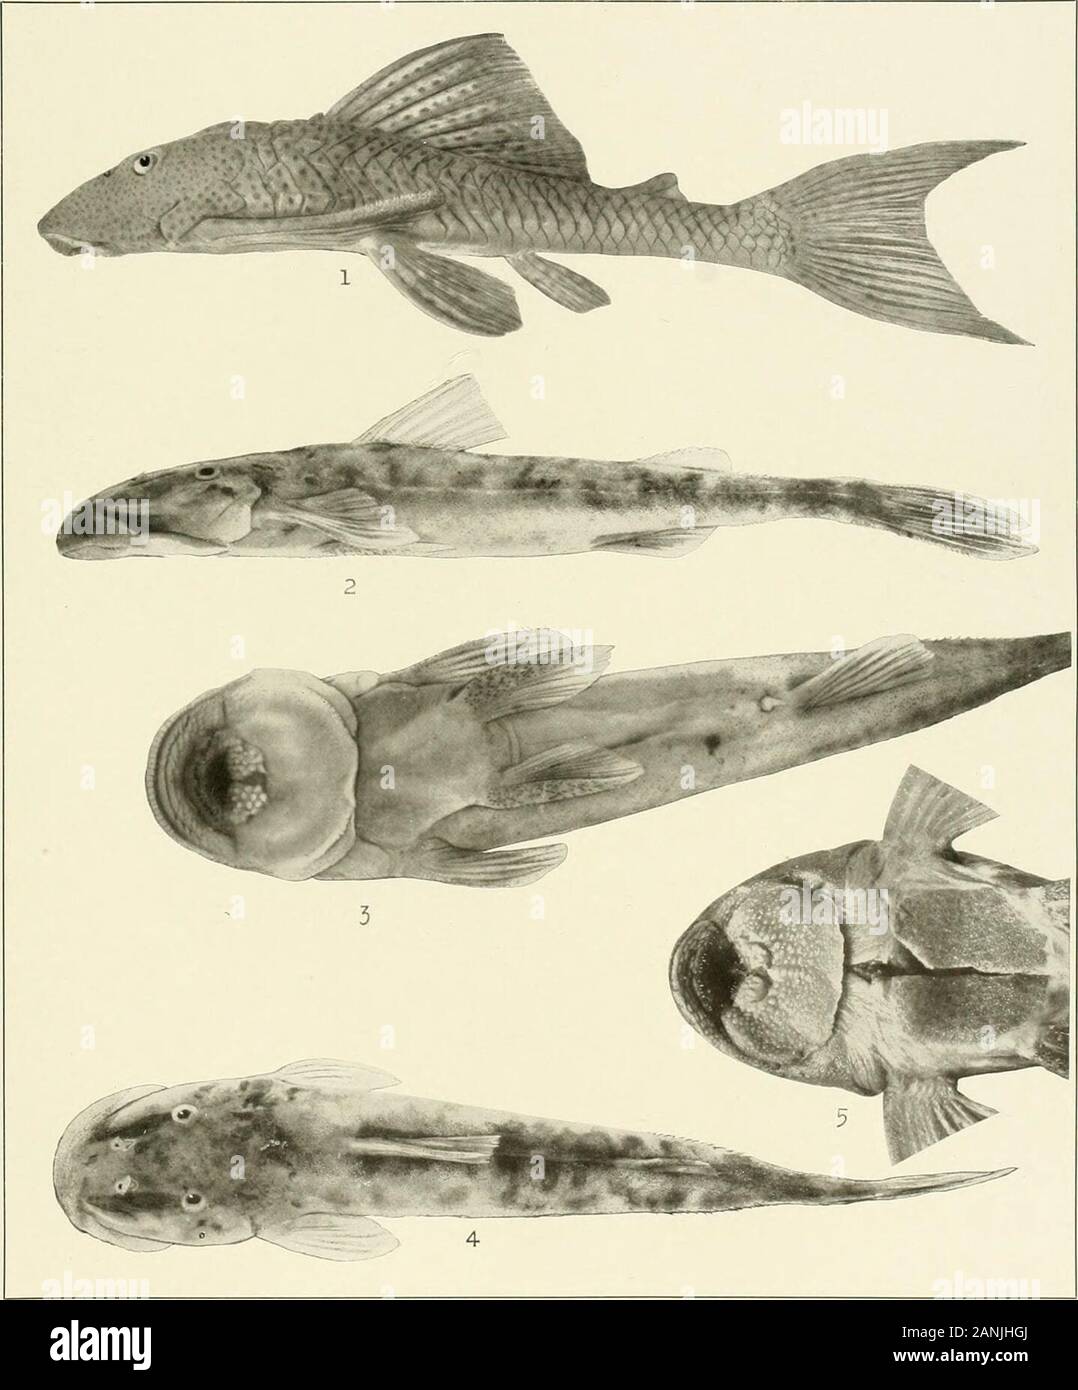 The freshwater fishes of British Guiana, including a study of the ecological grouping of species and the relation of the fauna of the plateau to that of the lowlands . *^^ 1. PlecostomushemiurusEigenmann. (Type.) 201 mm. Xo. 1.544.  . PseudancistrusnigrescensEigenmann.(Type.) 182 mm. No. 1539. 3. Ancistrus lithurgicus Eigenmann. (Type.) 05 mm. No. 1524. Memoirs Carnegie Museum, Vol. V. Plate XXVI. 1. Plecostomus watwata (Hancock). 435 mm. No. 1540. 2-4. Lithogenes villosus Eigenmann. (Type.) 44mm. No. 1002. 5. Neoplecostomus granosus (Cuvier and Valenciennes). In British Museum. Memoirs Carneg Stock Photo